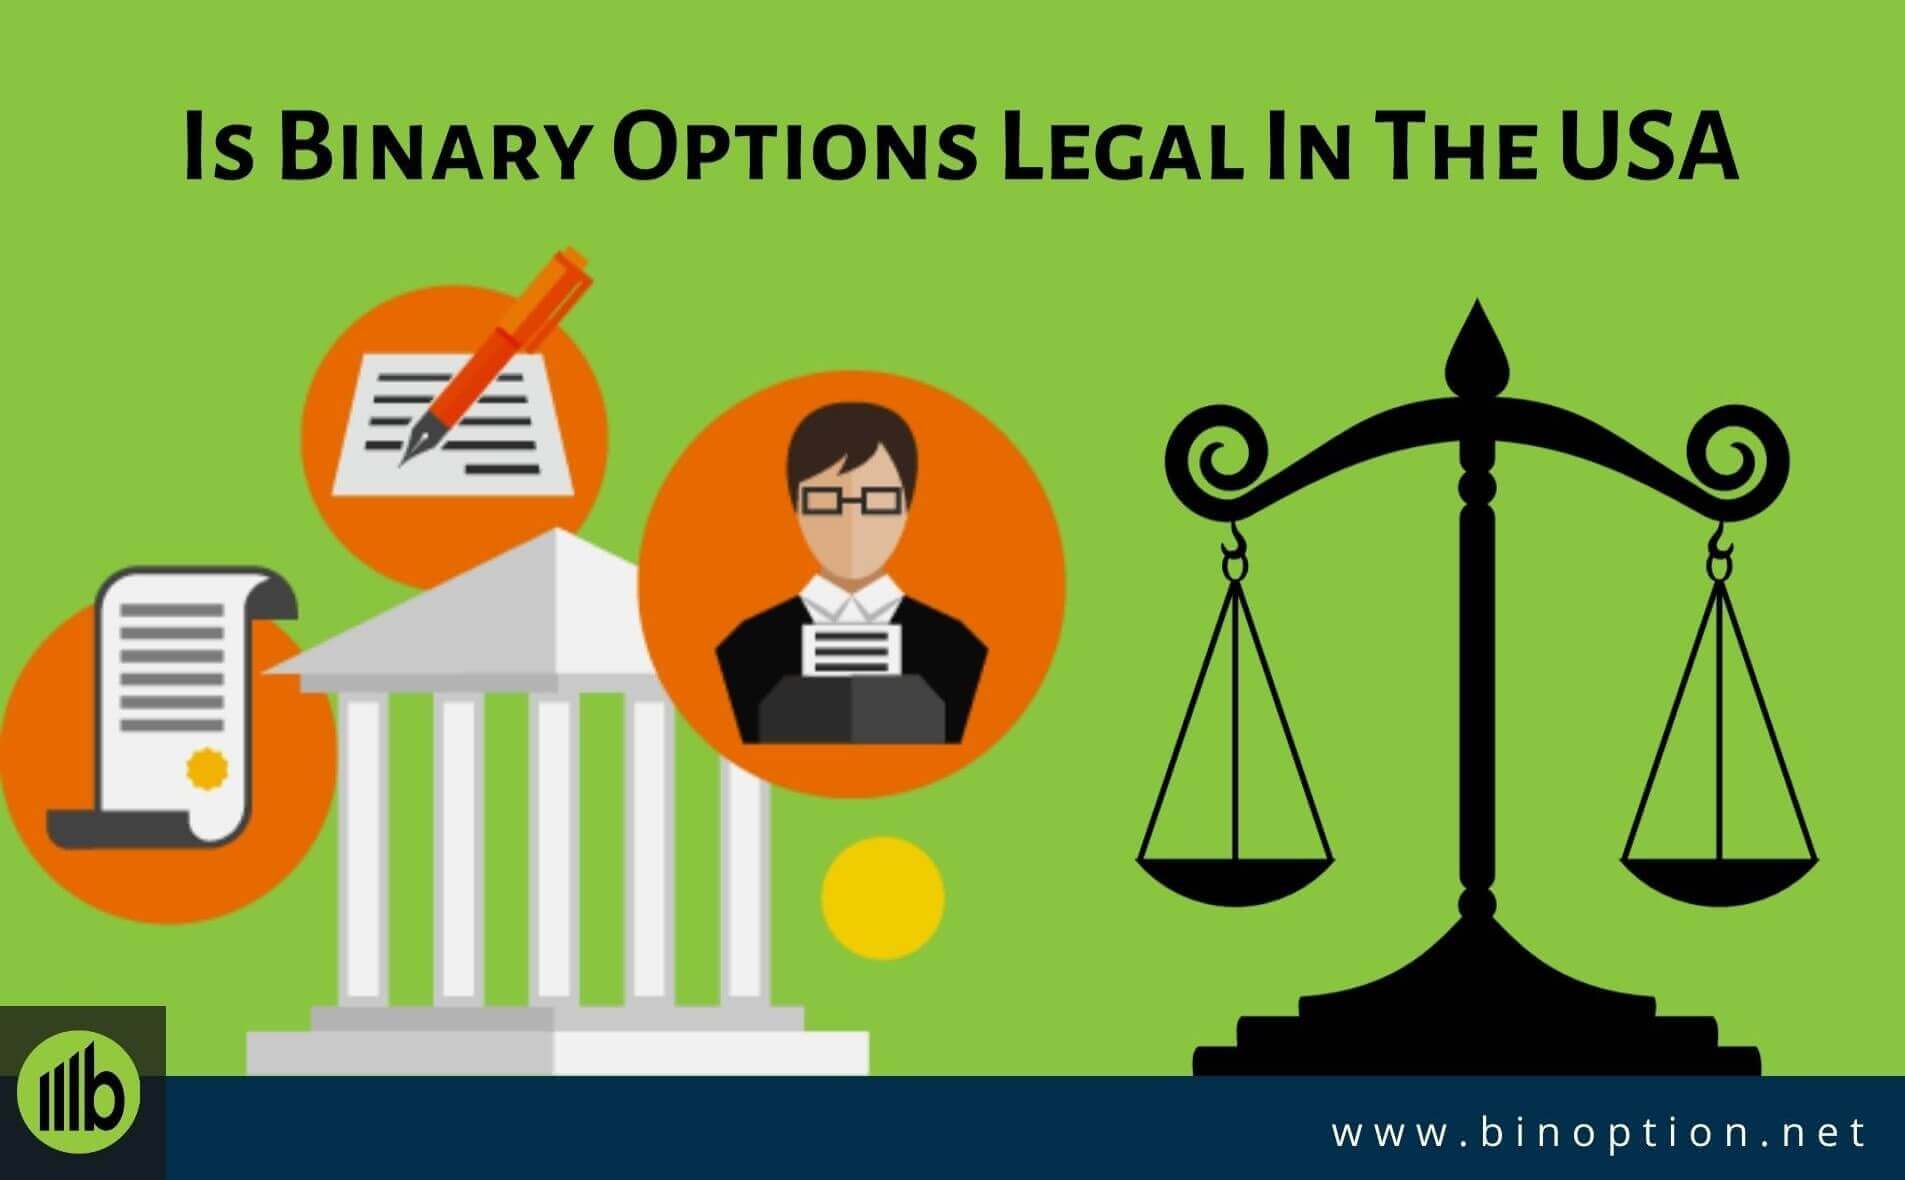 Are binary options legal in the us